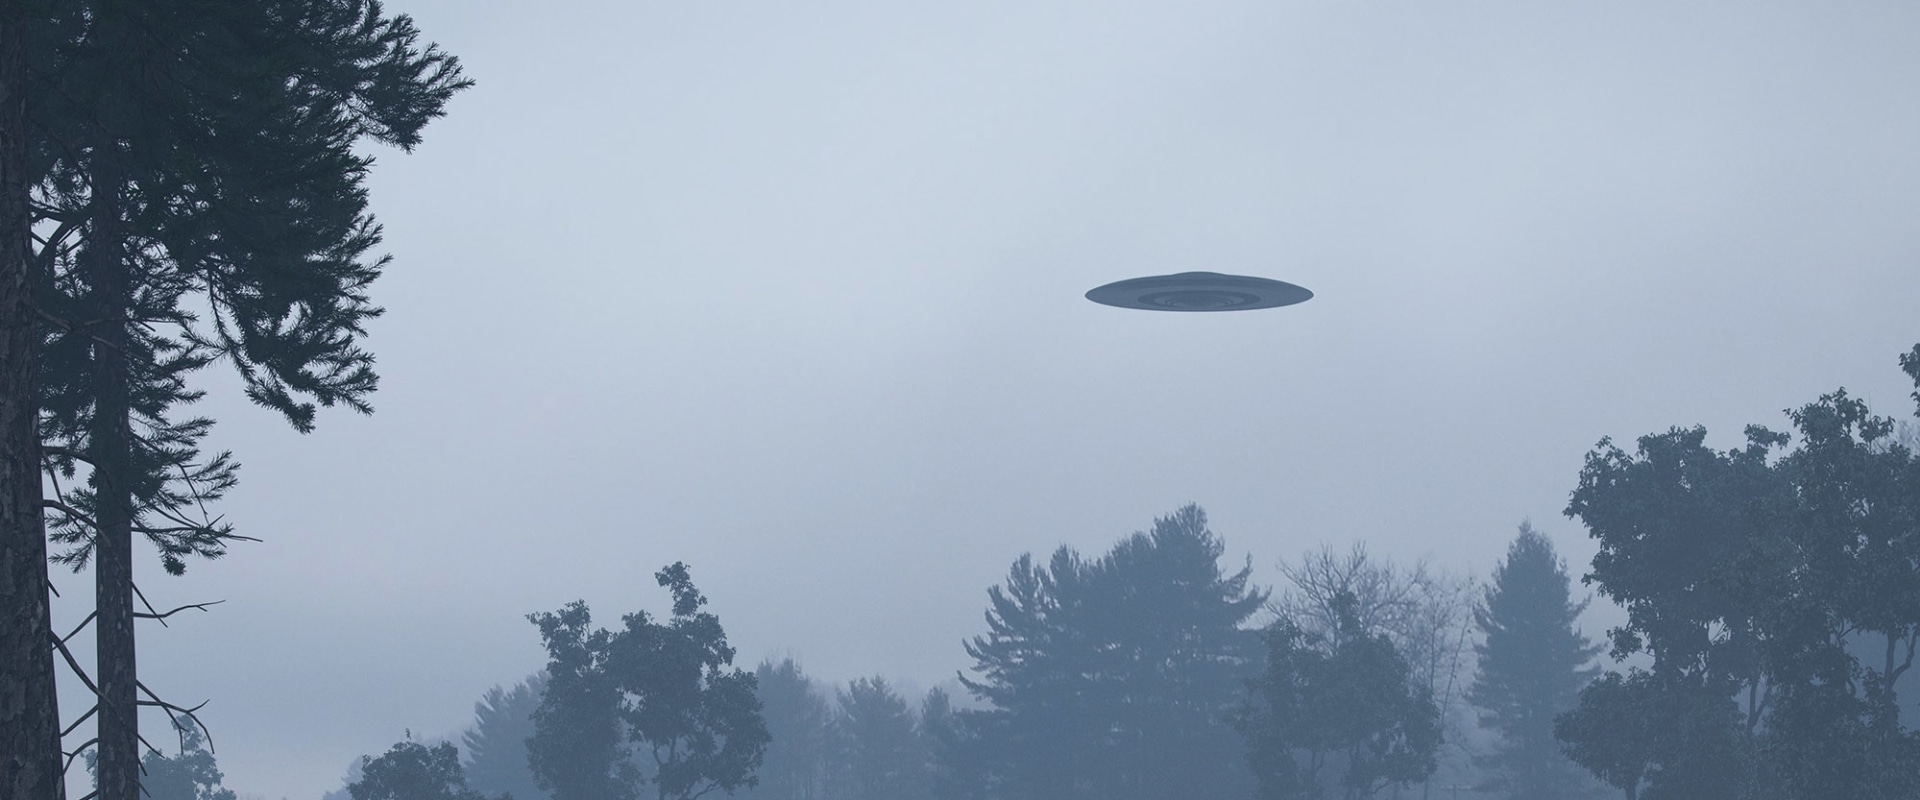 Claims of Alien Sightings and Encounters Near Area 51